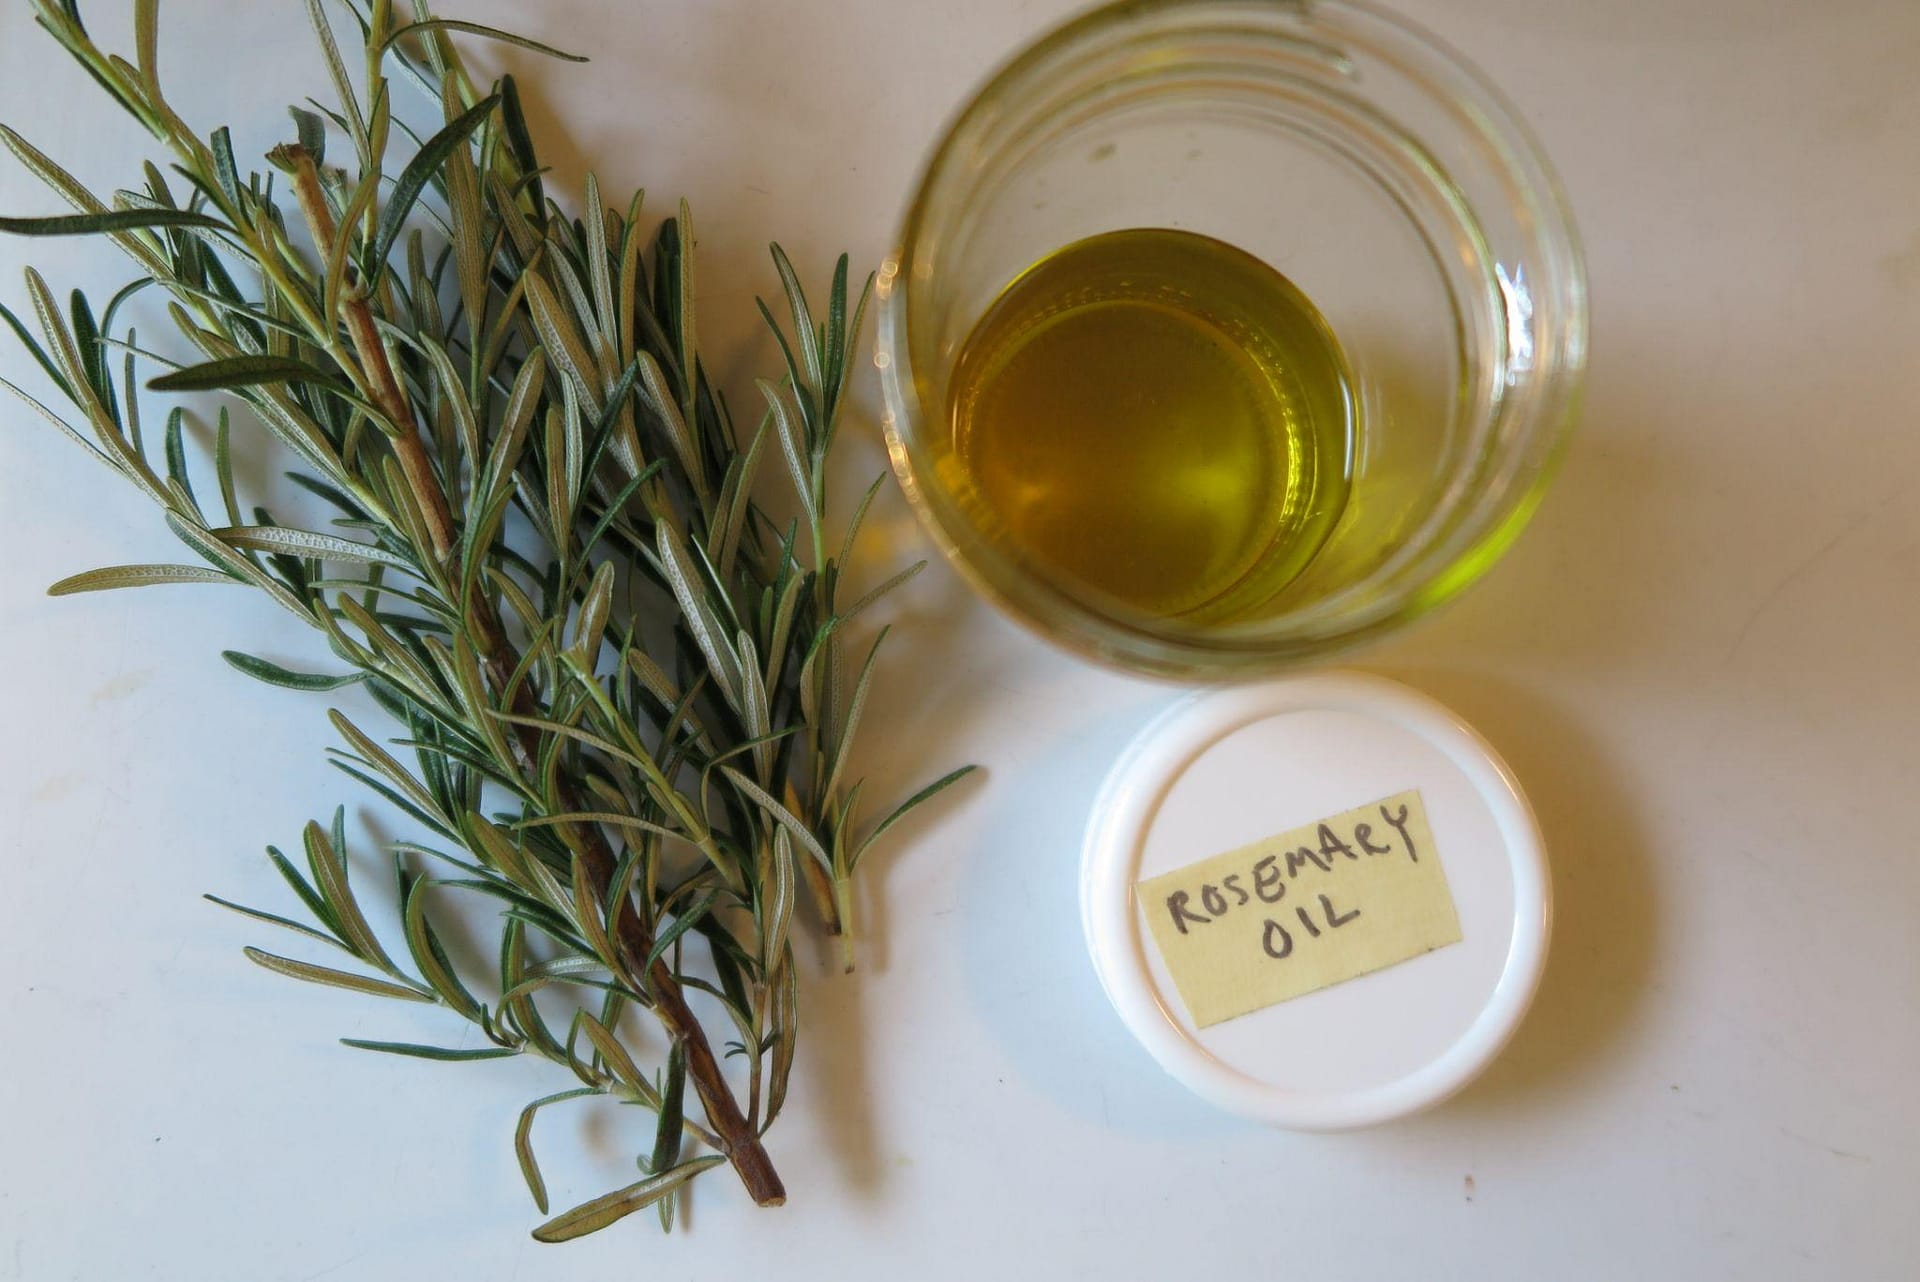 A bundle of rosemary next to a small glass jar of yellow oil with the lid removed labeled rosemary oil